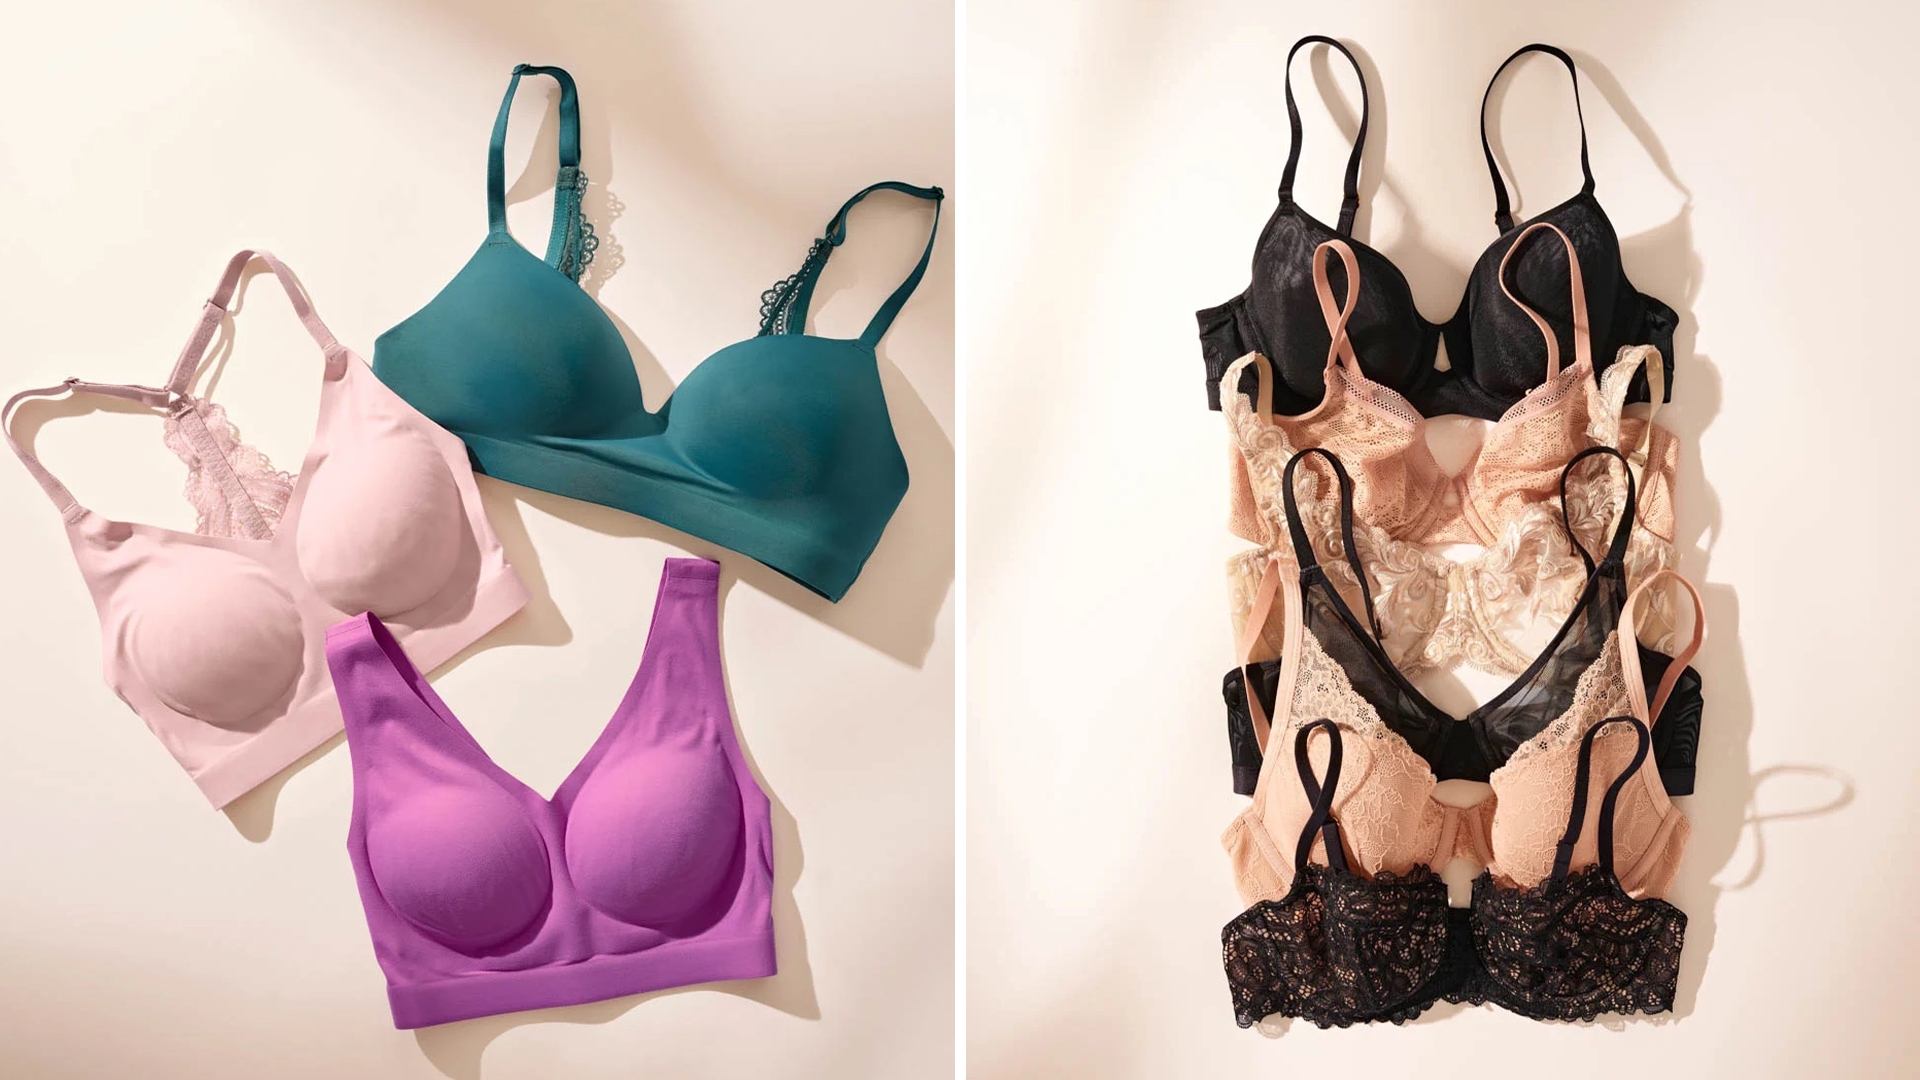 (Left) Soma<sup class=st-superscript>®</sup> laydown of pink, purple, and teal bralettes. (Right) Soma<sup class=st-superscript>®</sup> laydown of black and nude bras.